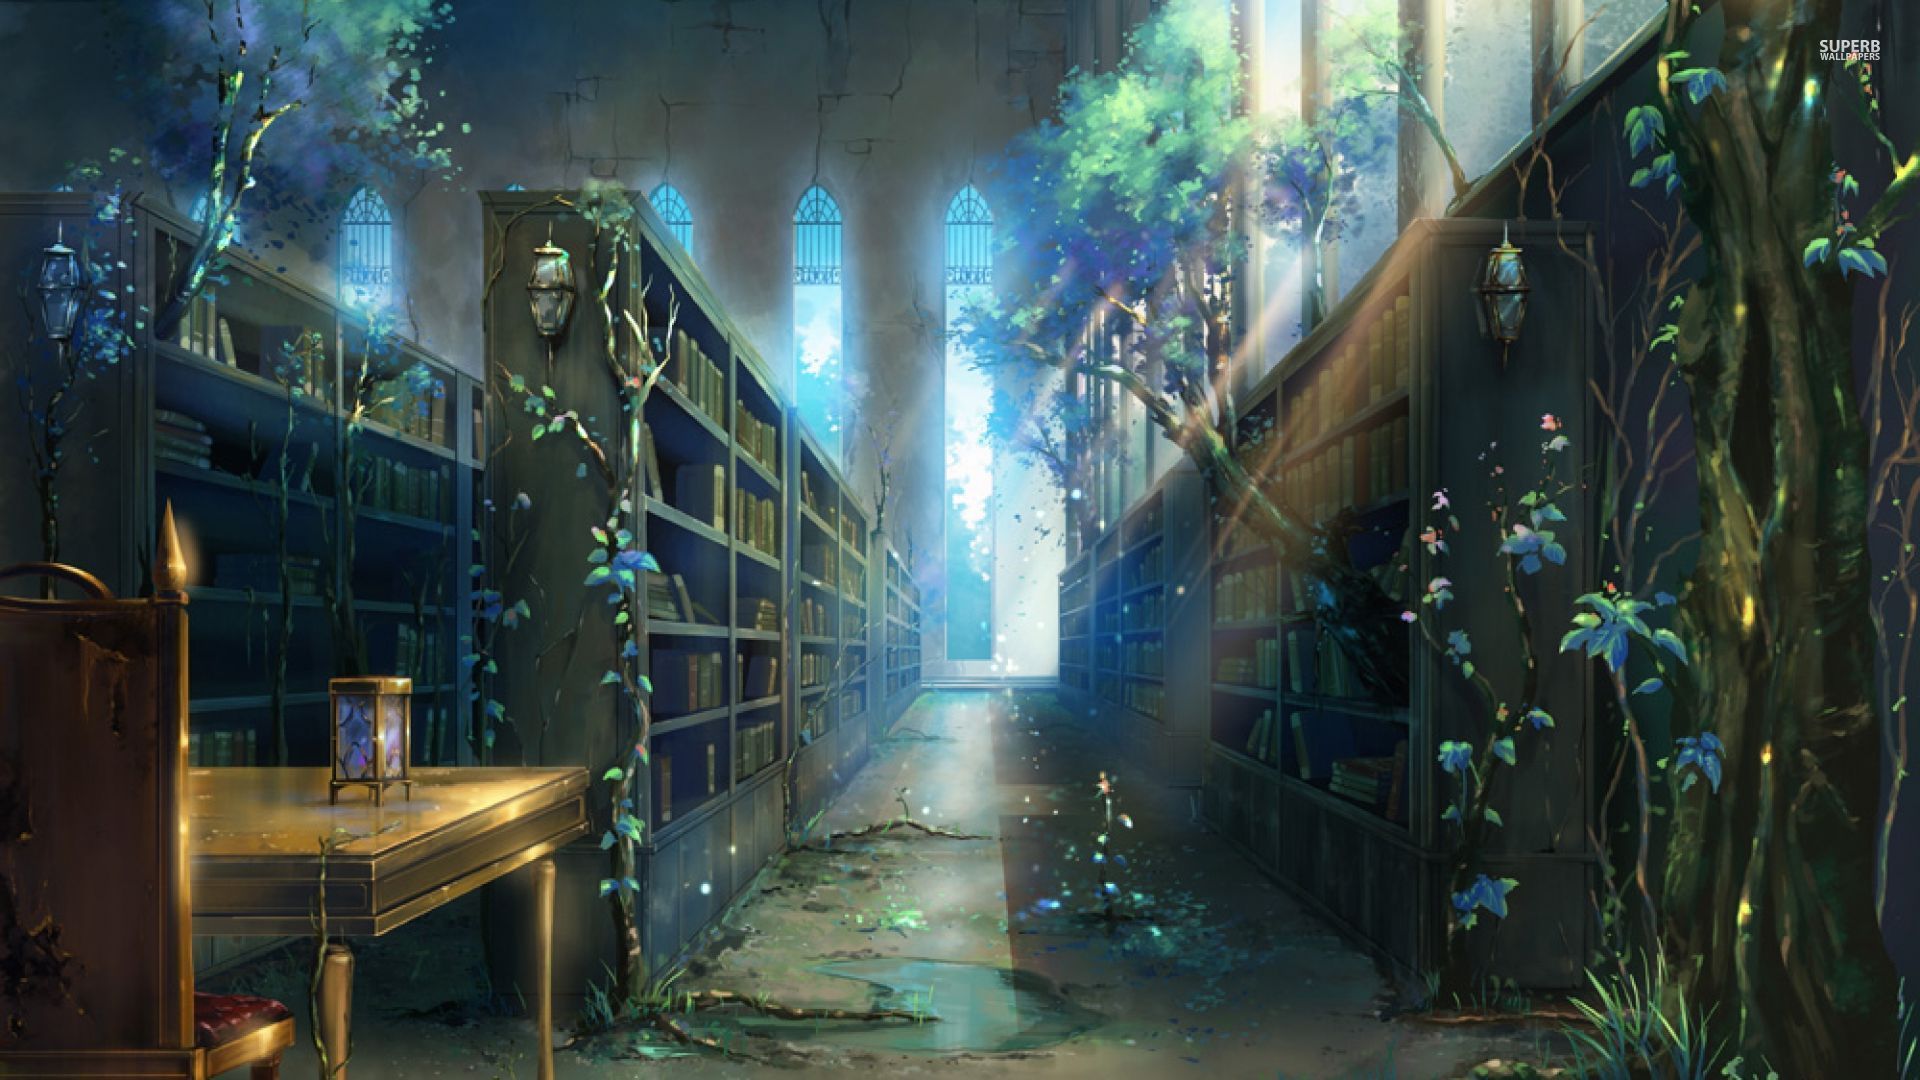 Fantasy Library Wallpapers